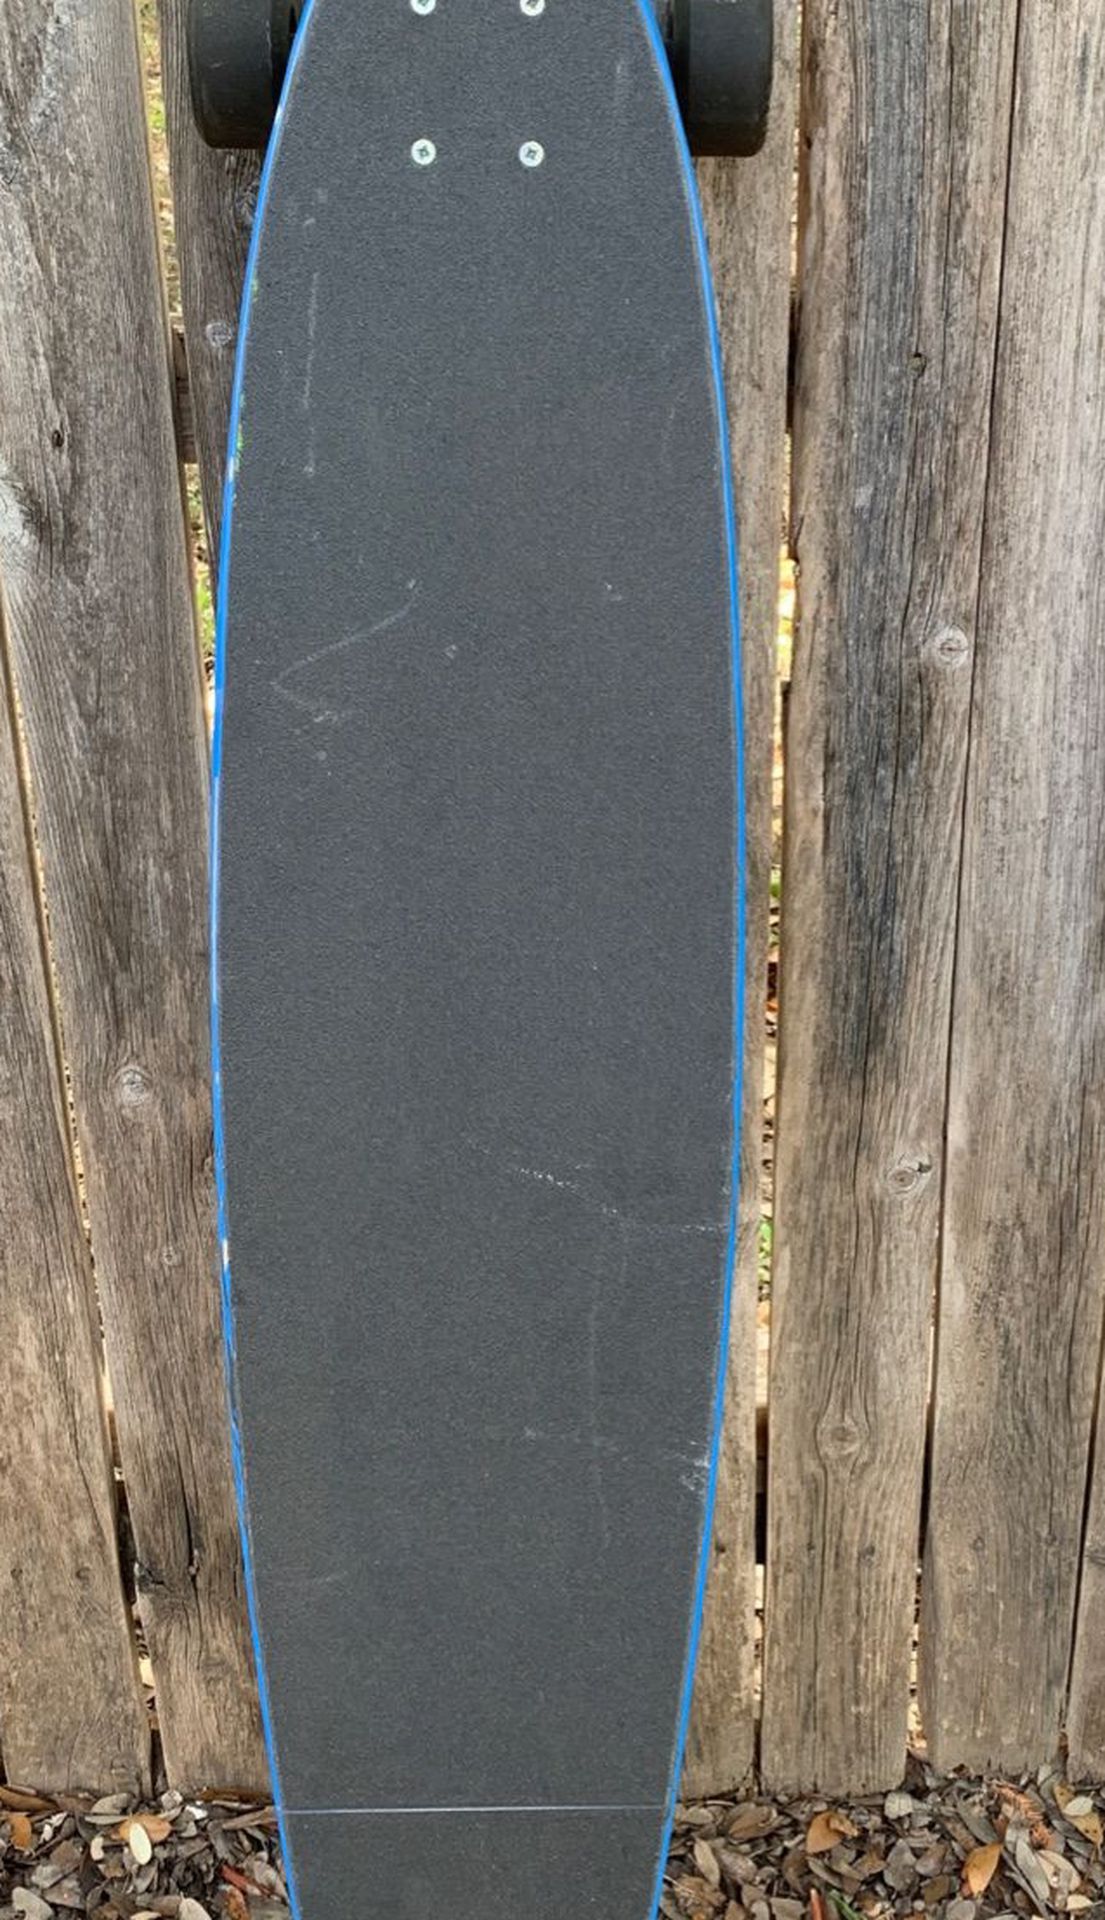 Custom long board painted by chickenfriedzombies